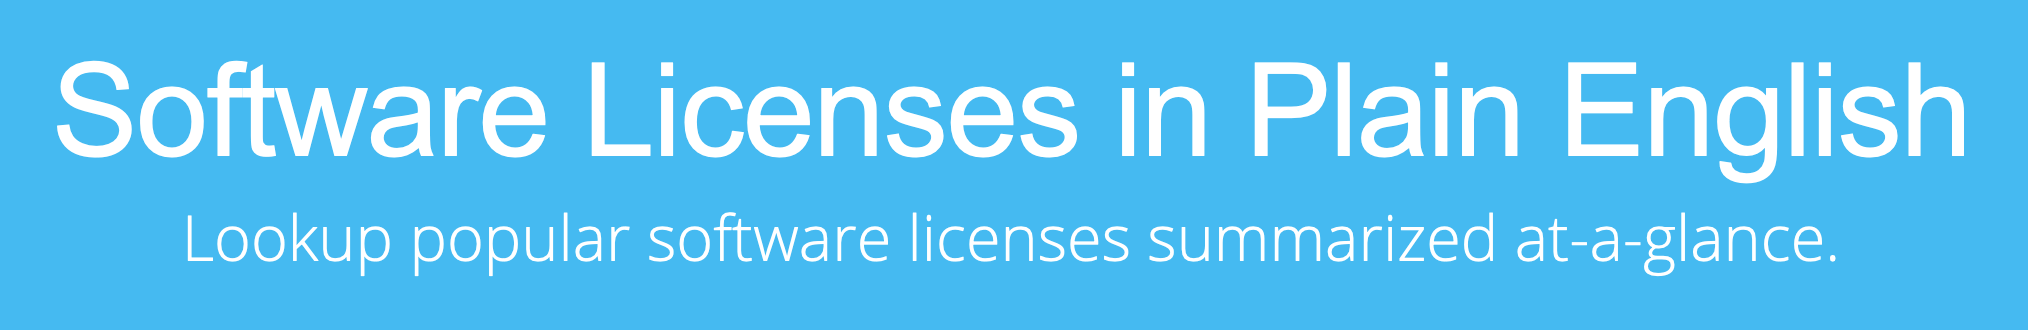 Software licenses in plain English – Lookup popular software licenses summarized at-a-glance.